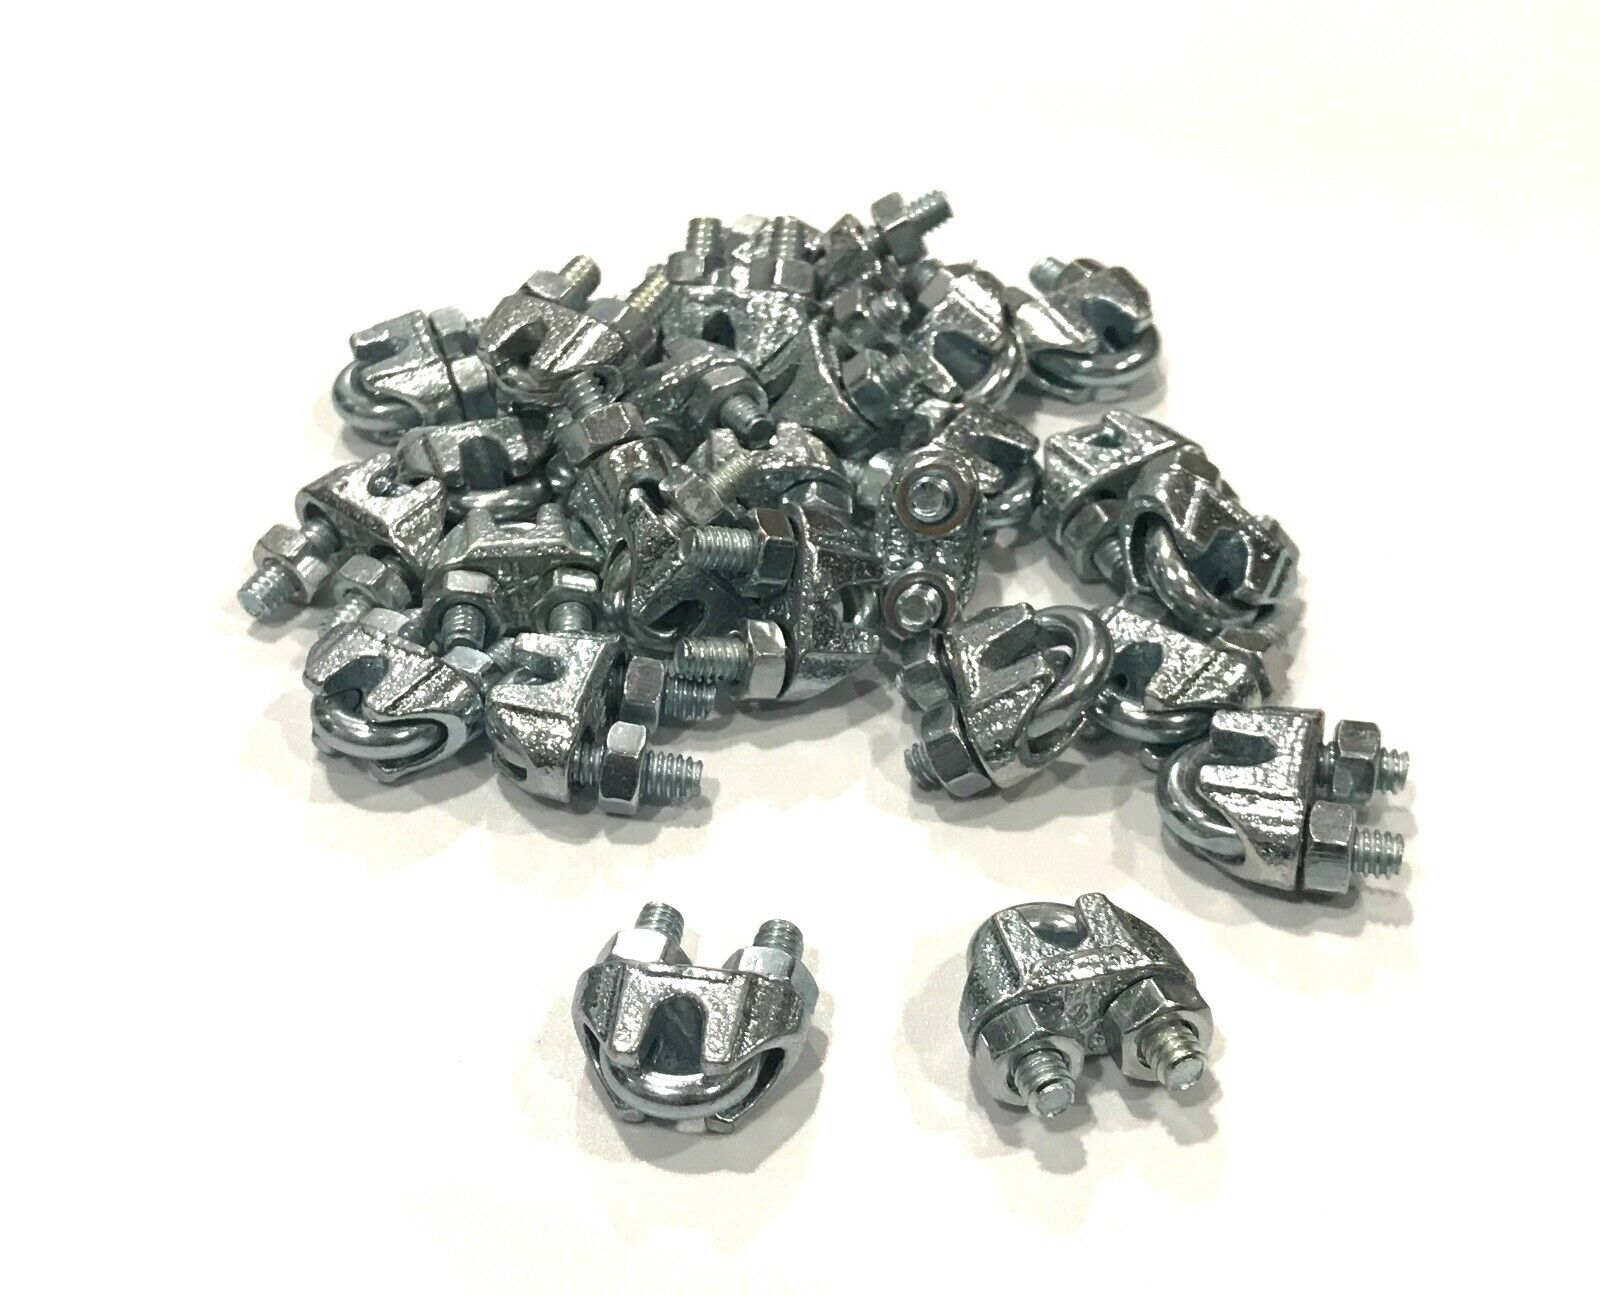 Cable Clamps 3/16” U-Bolts Galvanized Wire Rope Clamps Clips 6, 12, 50 ~ 100pcs